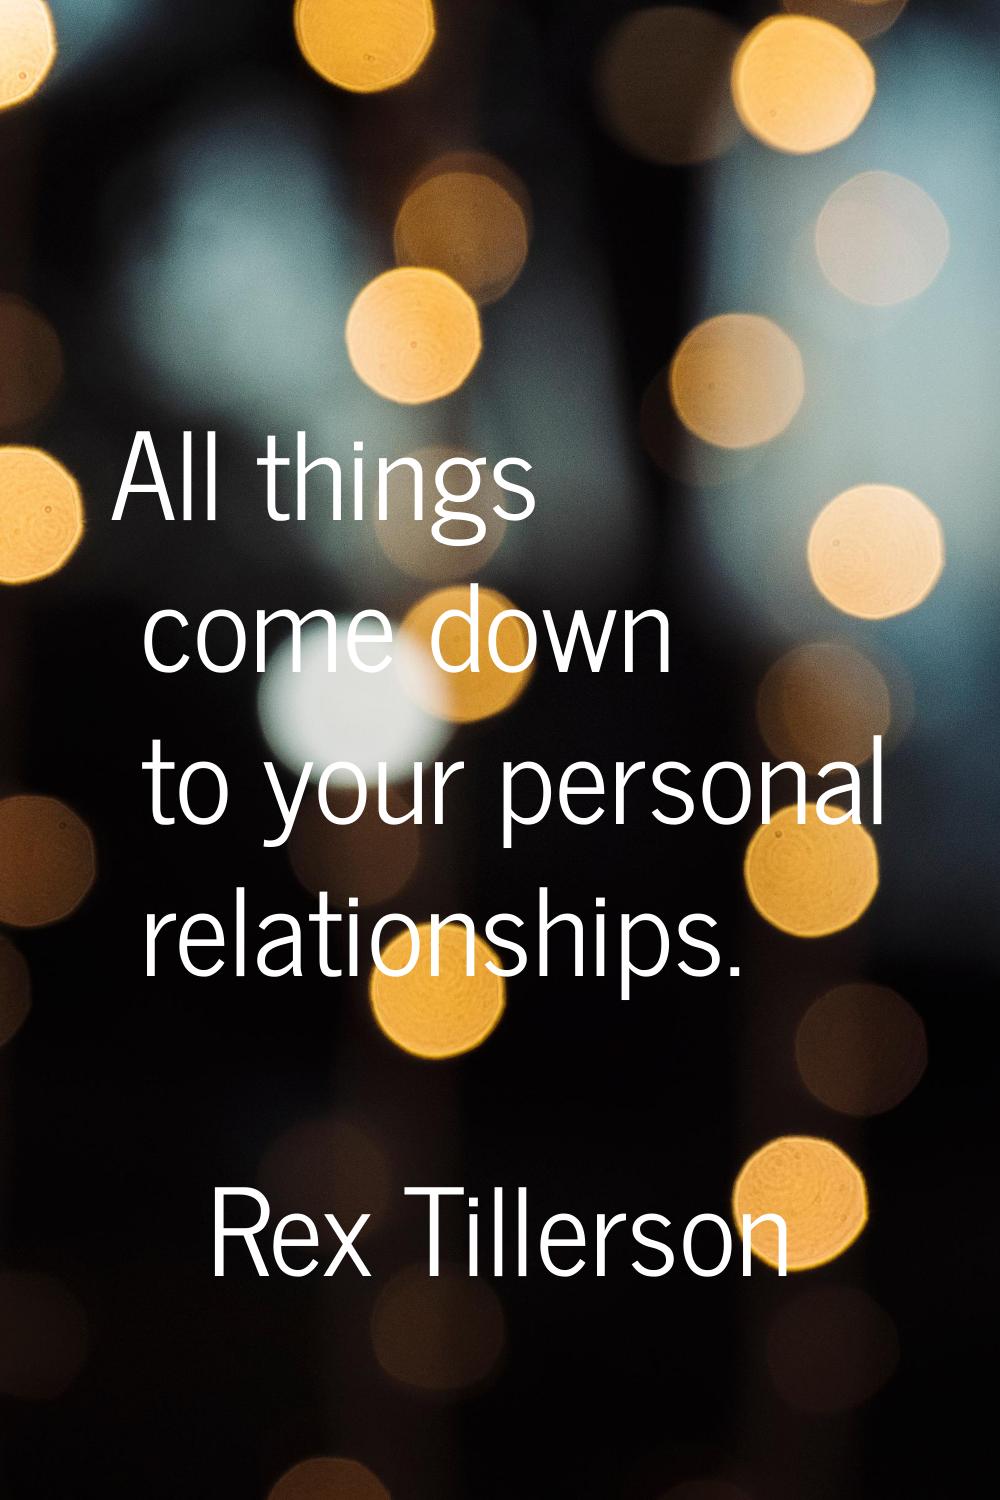 All things come down to your personal relationships.